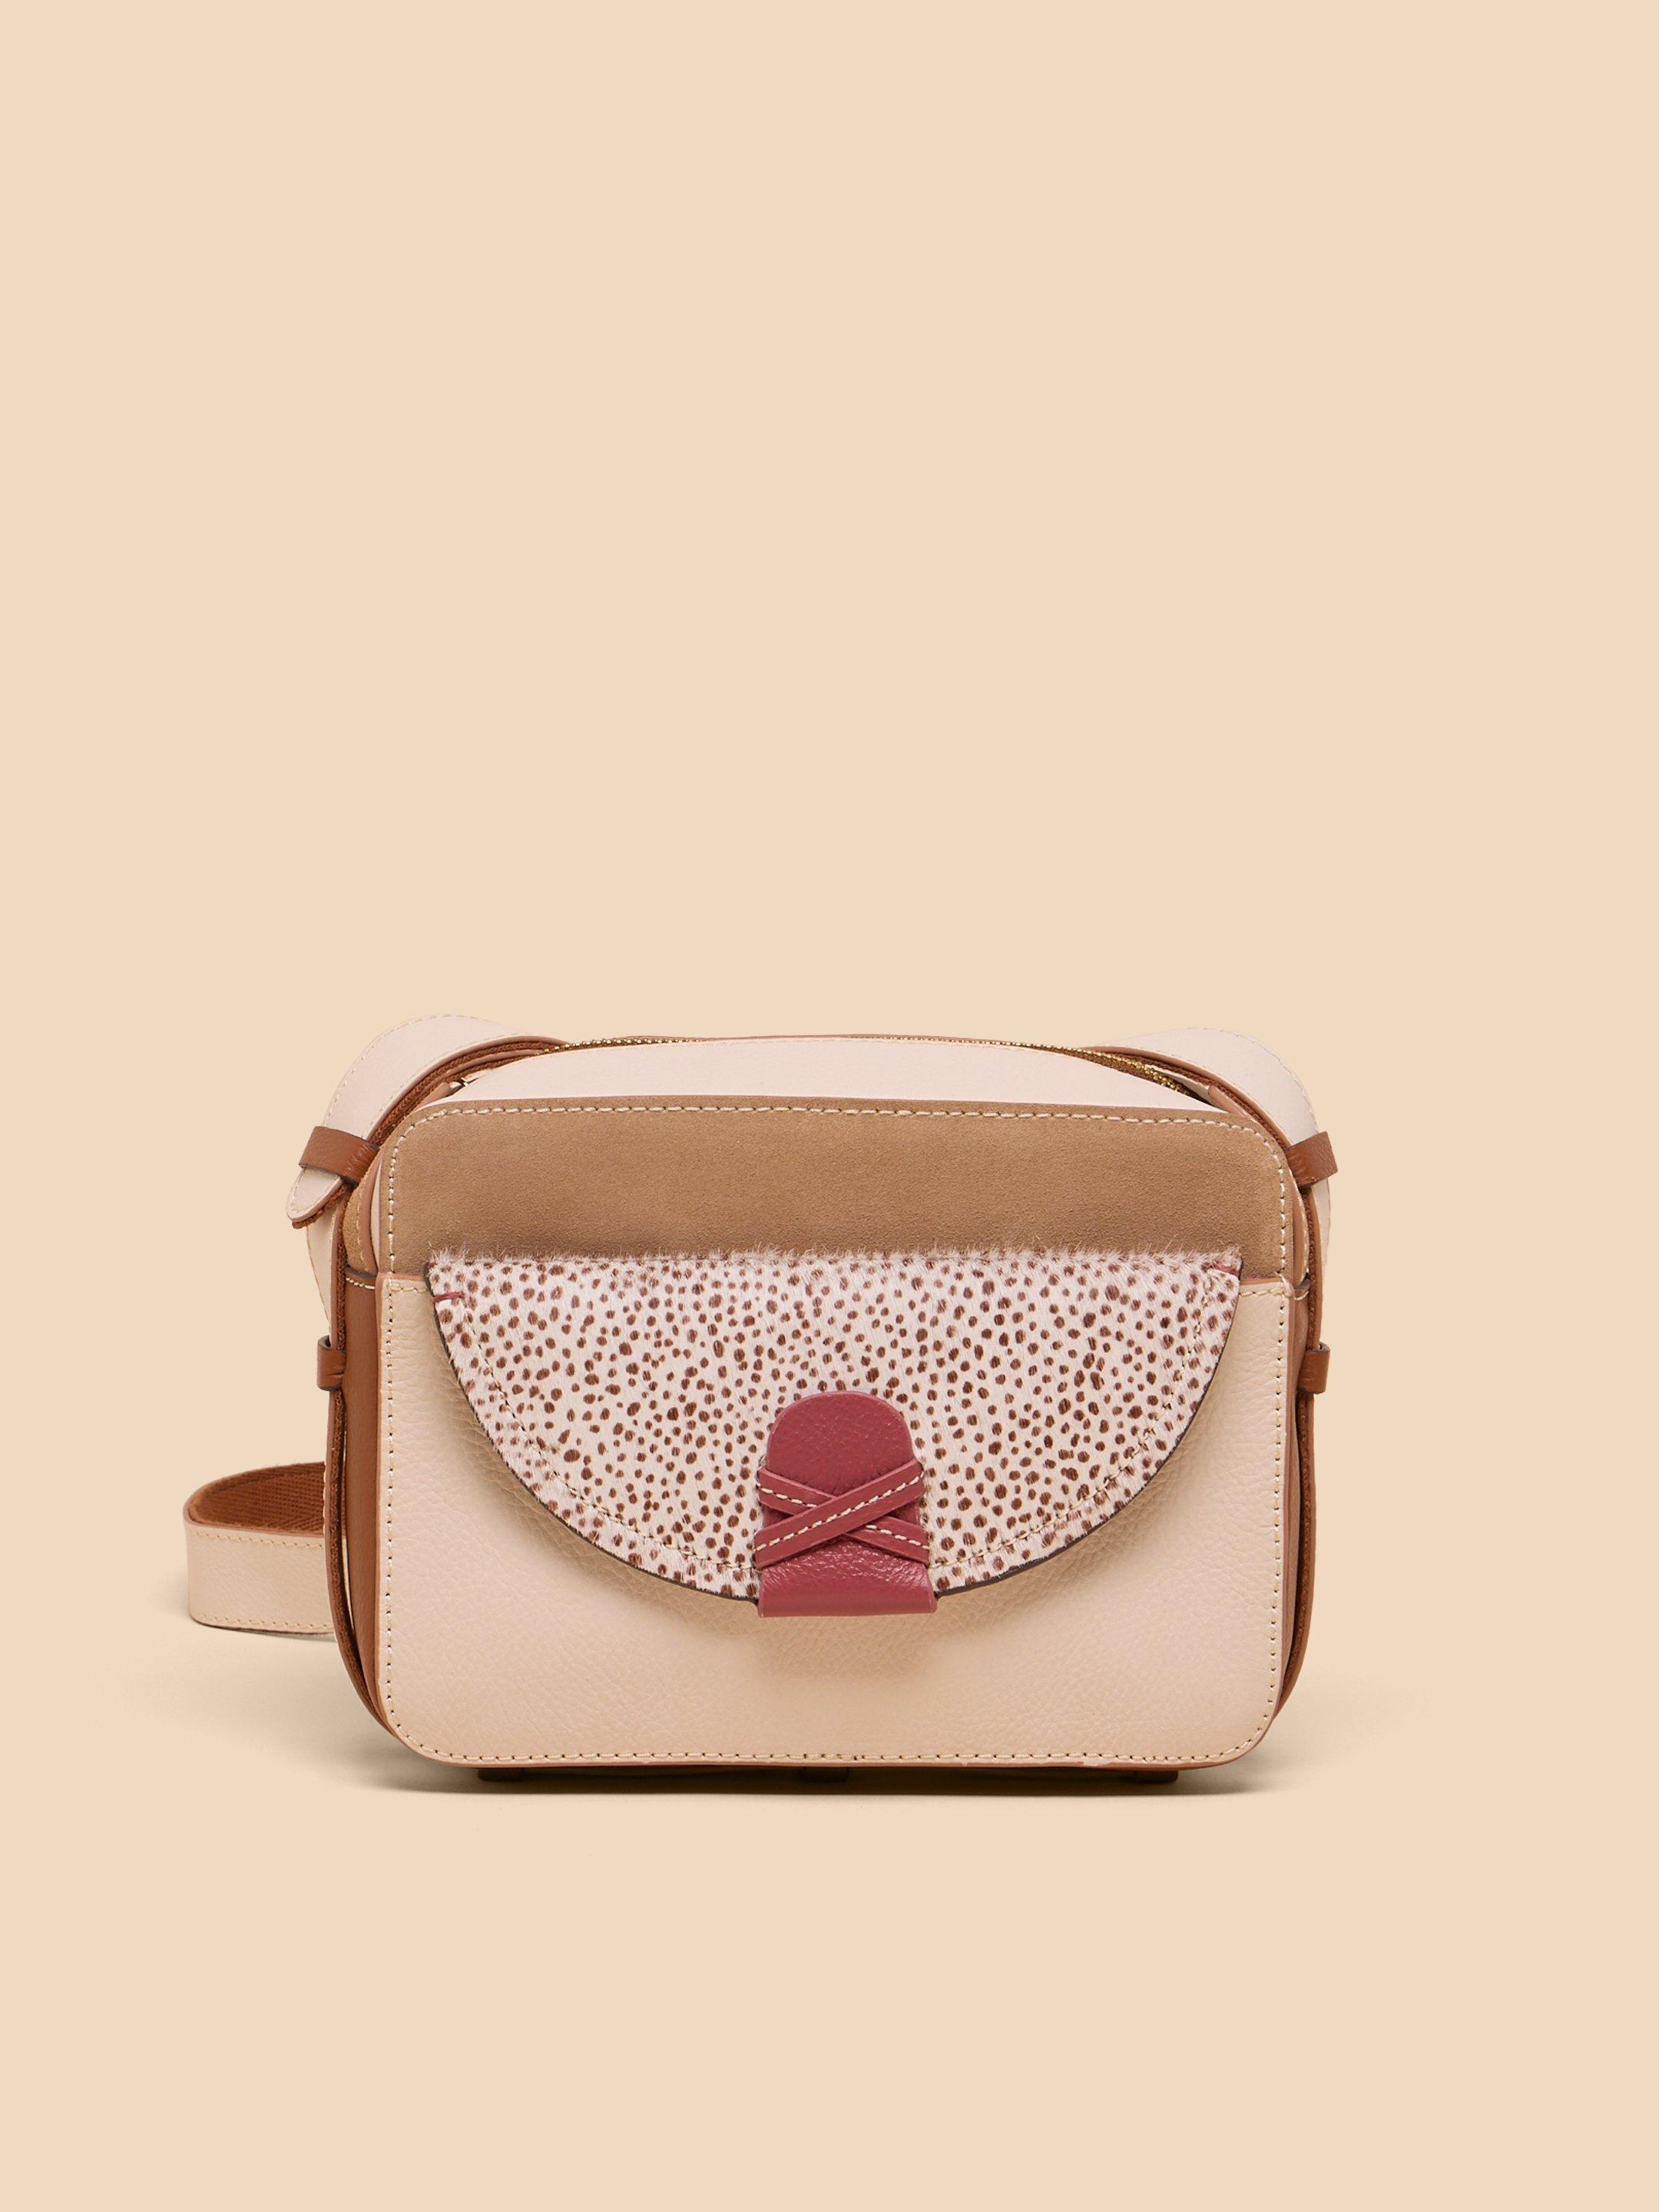 Leather Lola Camera Bag in NAT MLT - LIFESTYLE